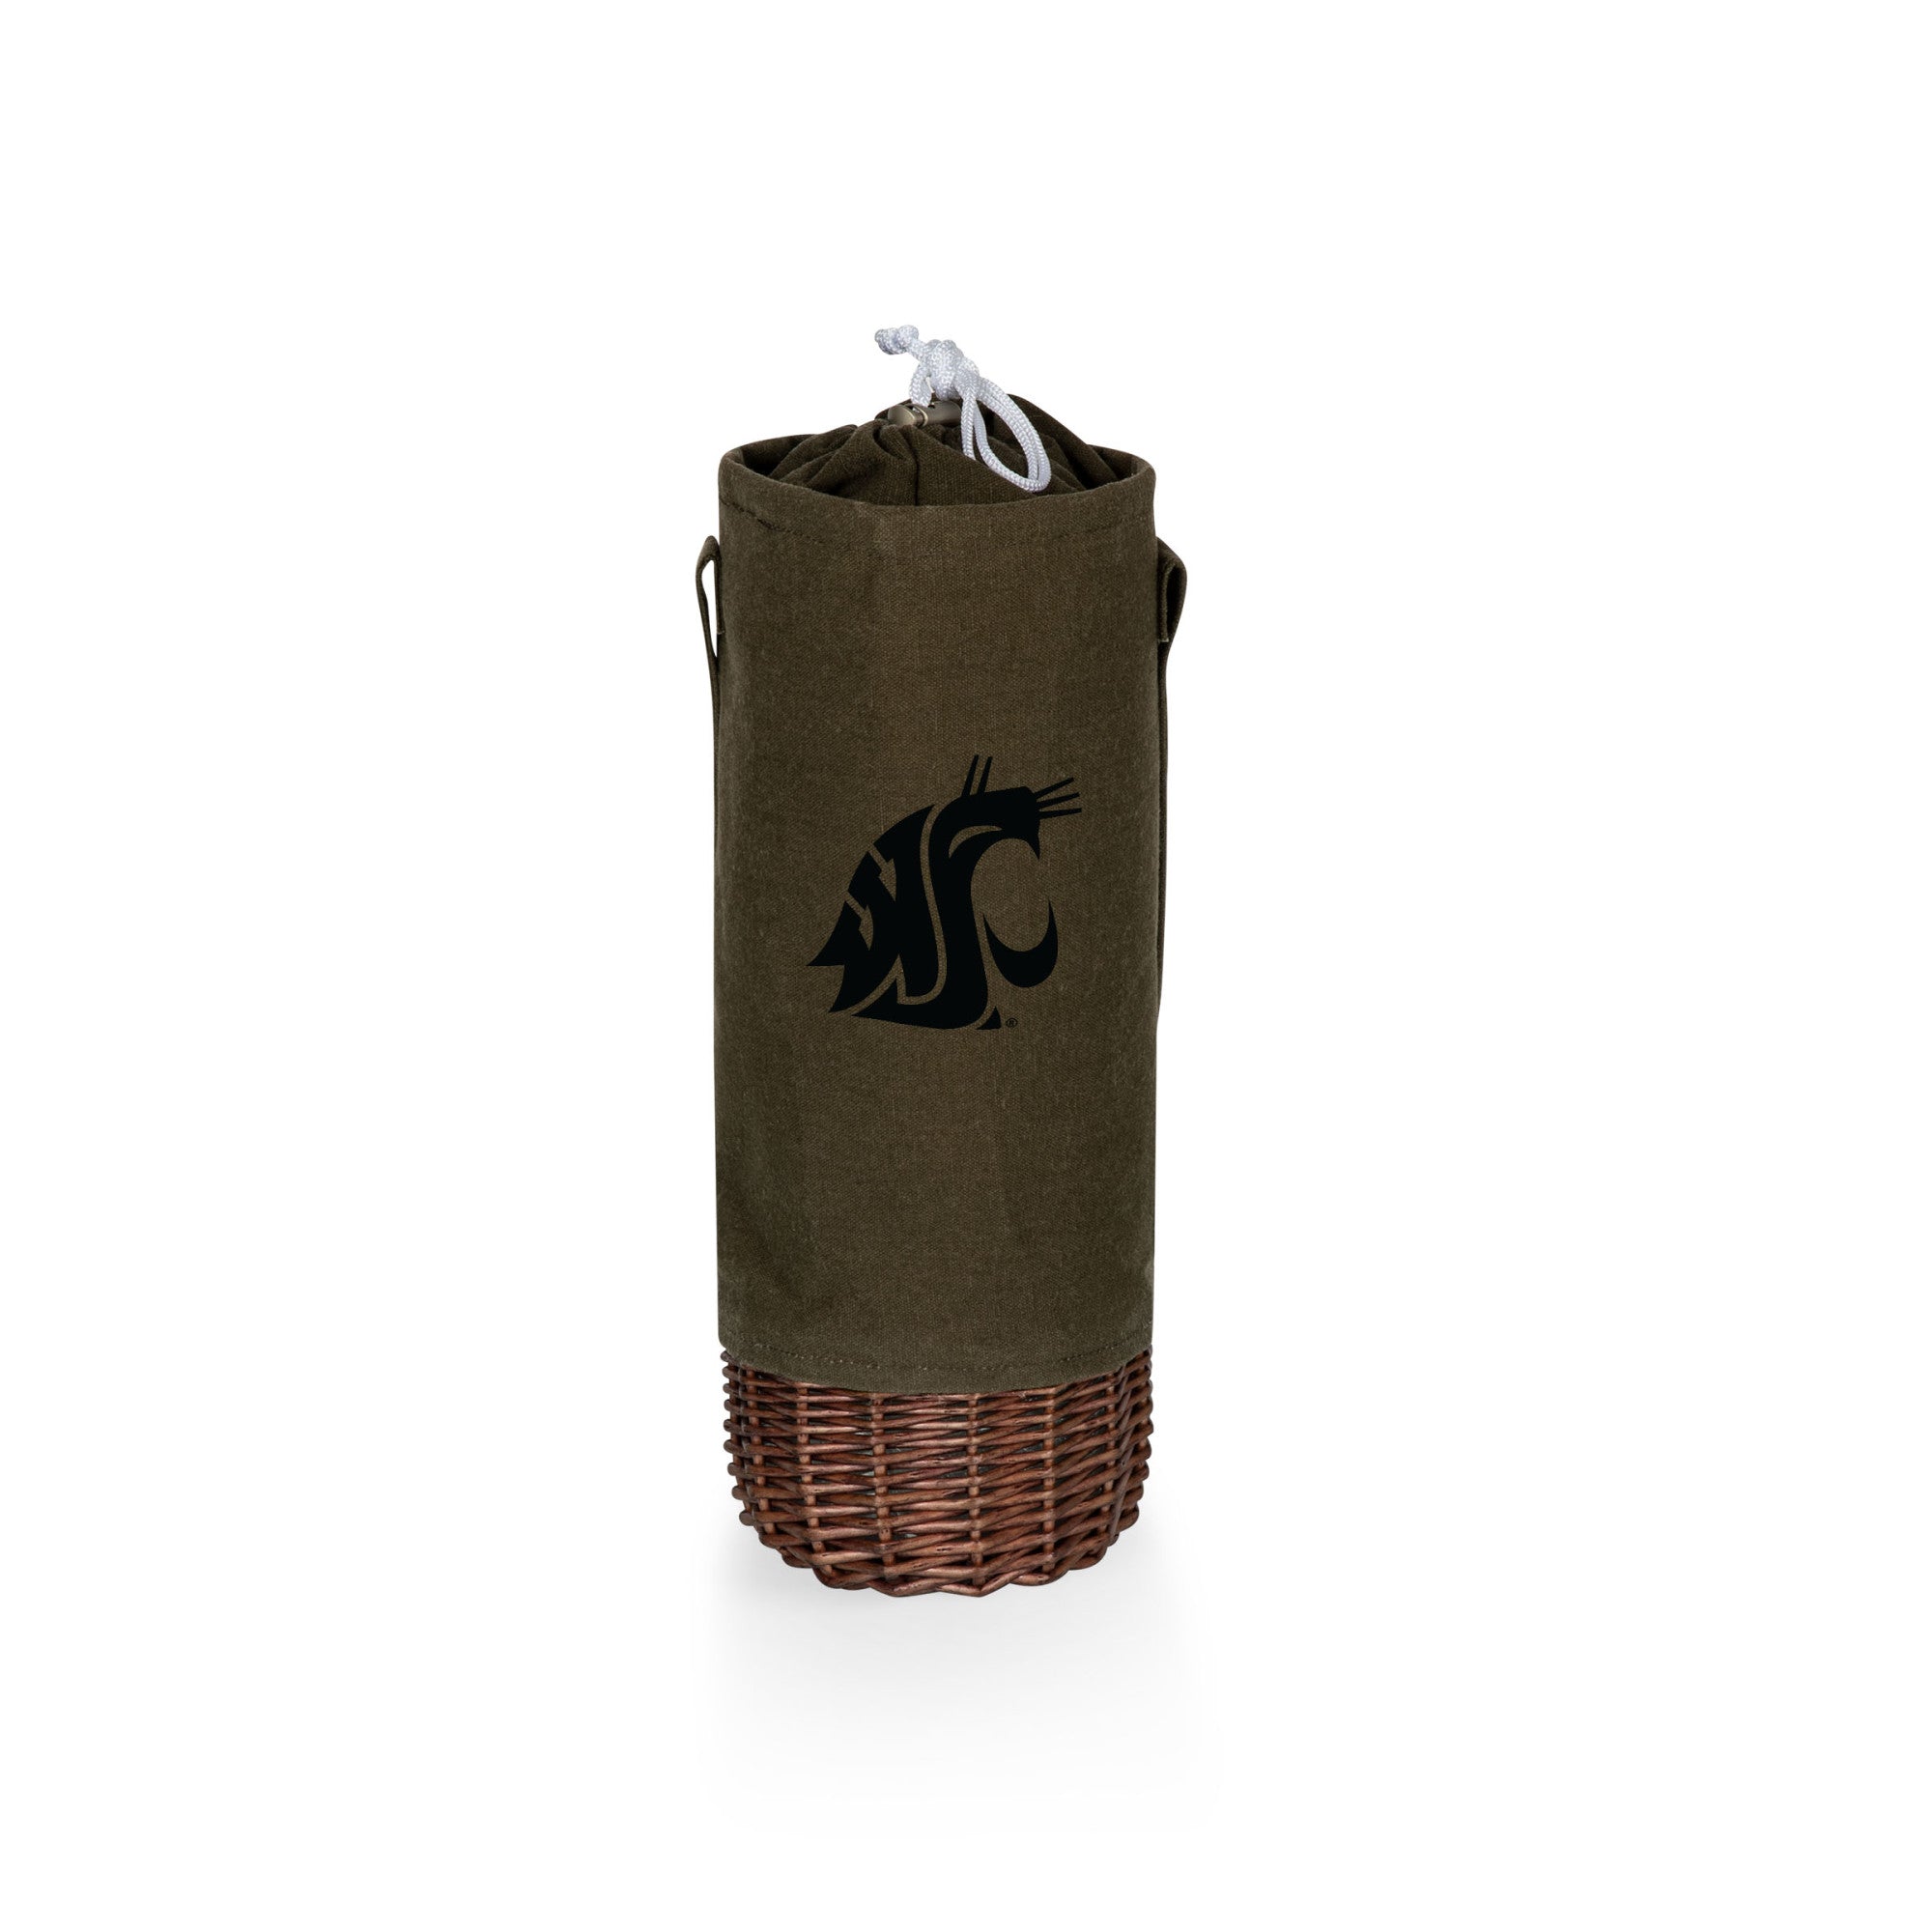 Washington State Cougars - Malbec Insulated Canvas and Willow Wine Bottle Basket